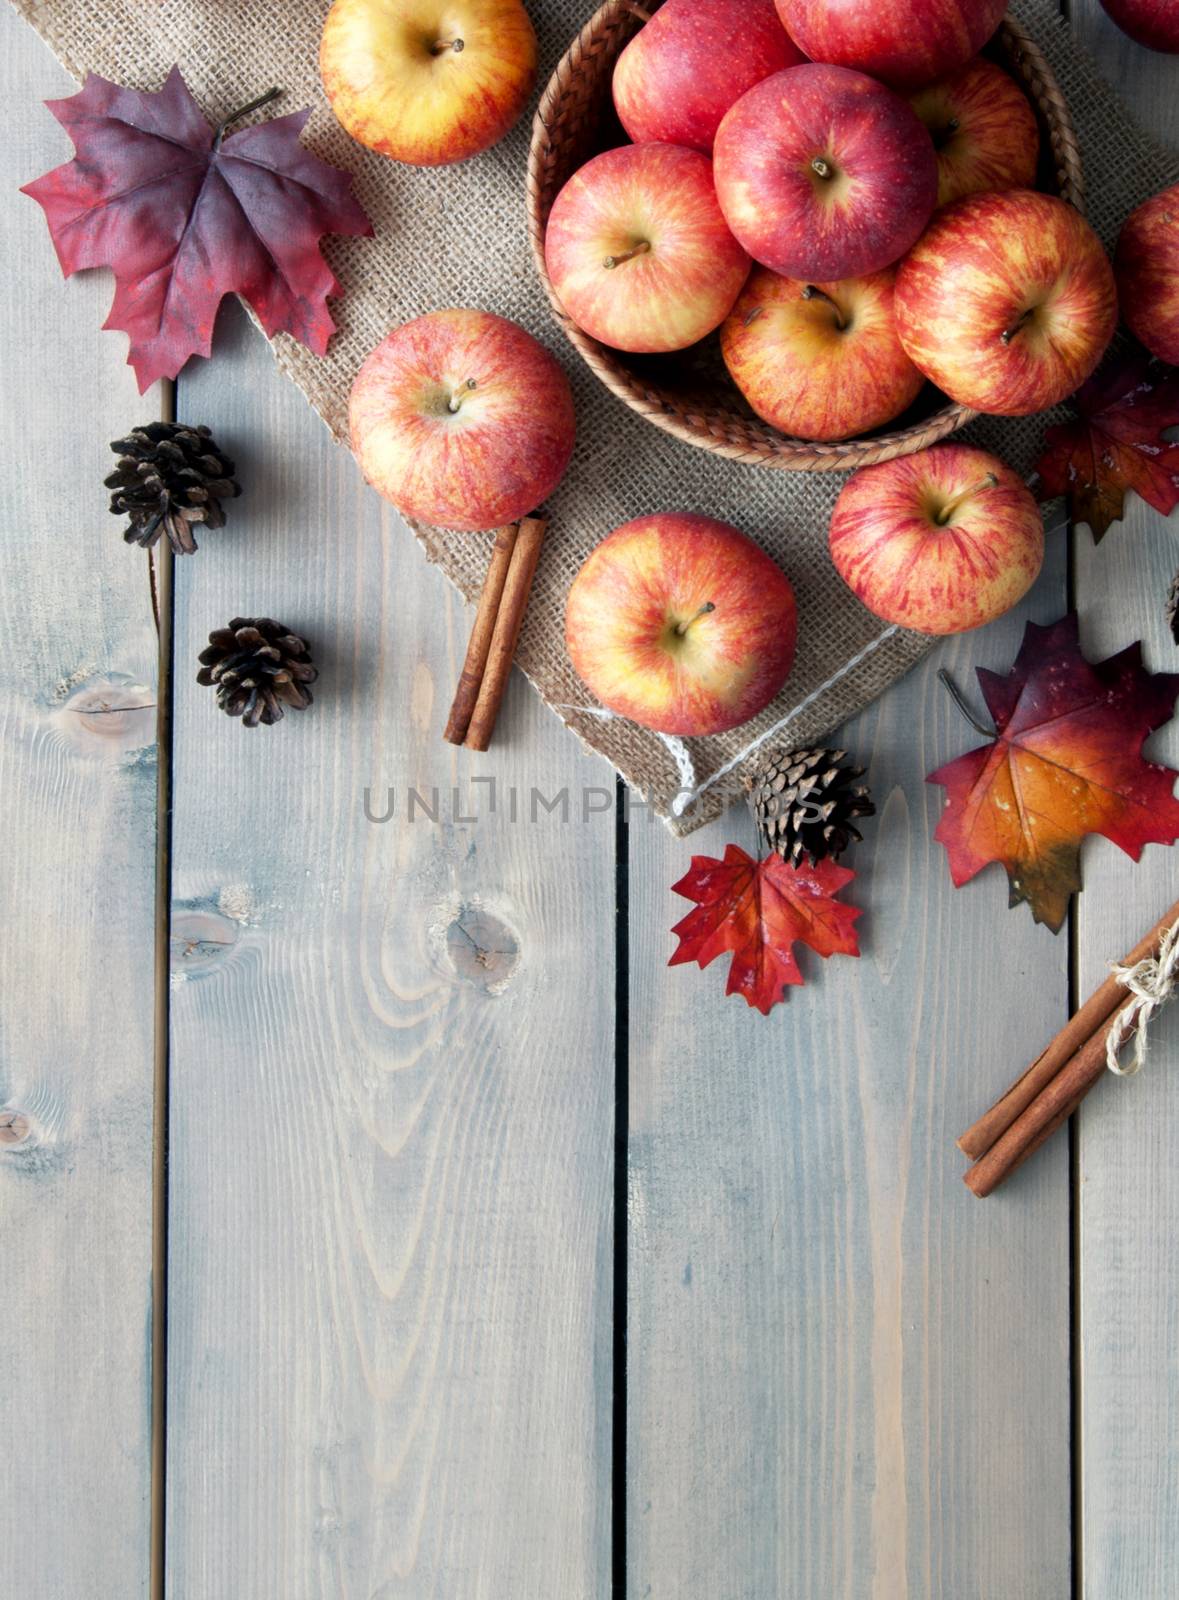 Autumn leaves with apples over a wooden background